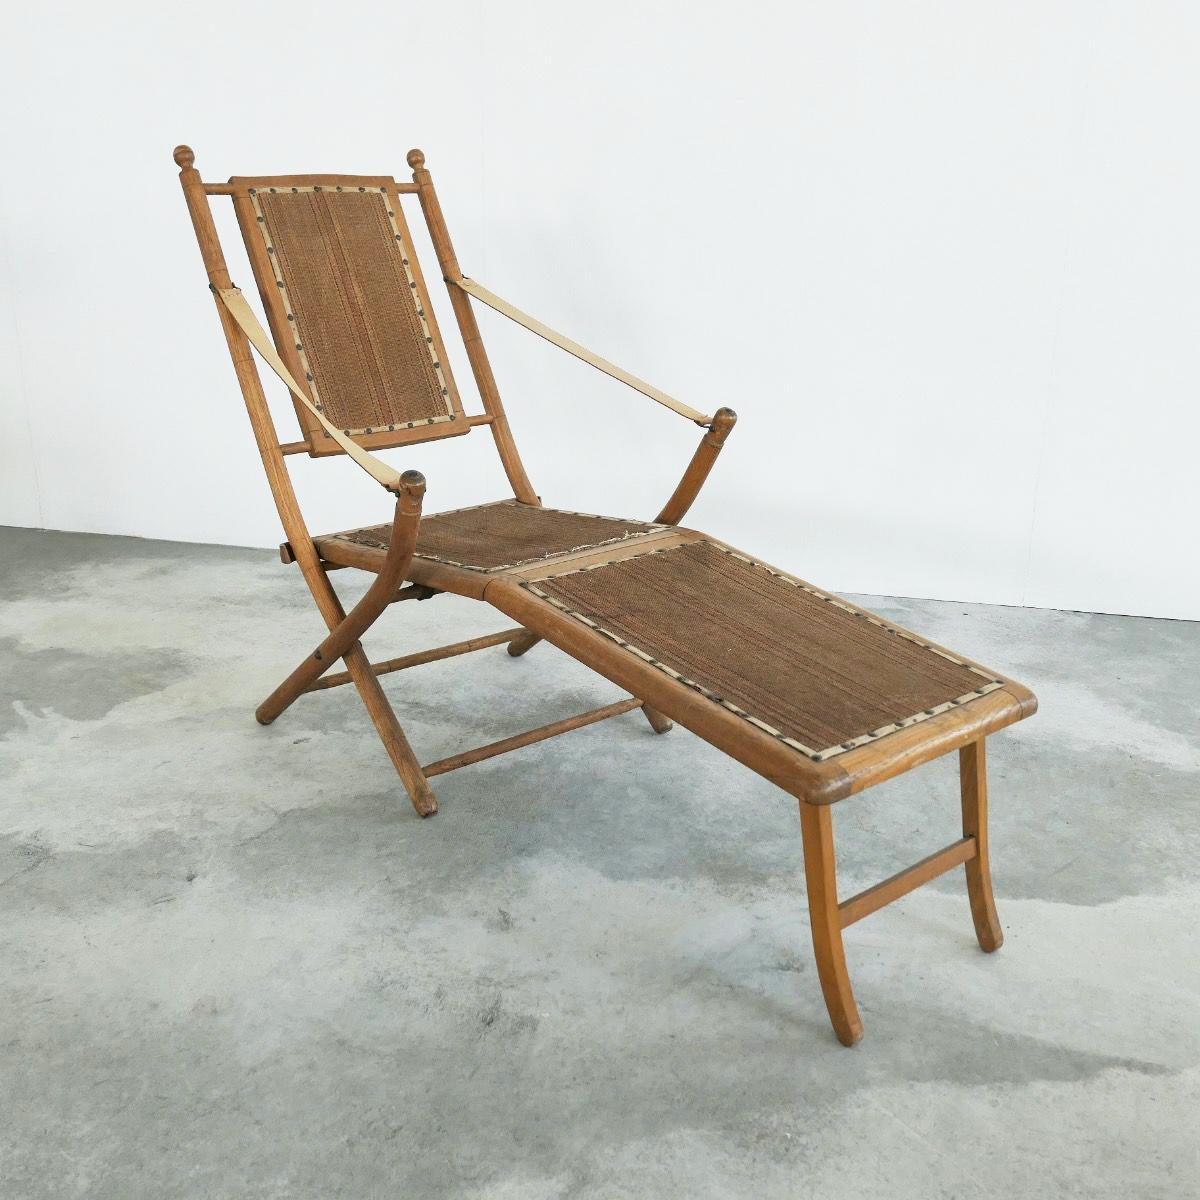 Antique chaise longue or deck chair in oak, early 20th century.

Very stylish chaise longue / steamer deck chair / garden chair in oak. Very decorative and also comfortable to rest in. A smart and elegant design with a compact footprint. The chair